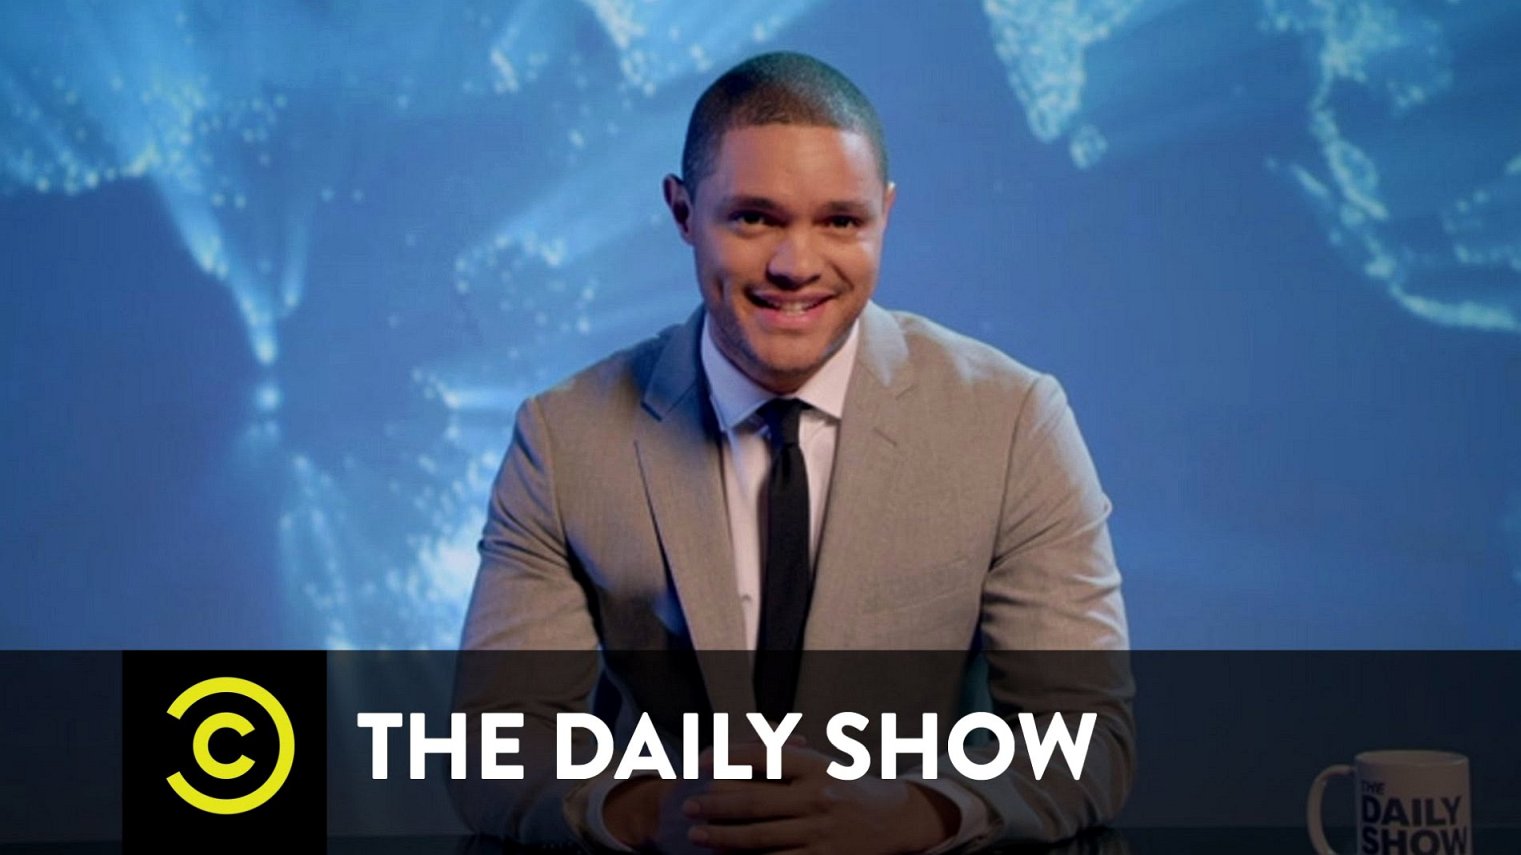 cast of The Daily Show season 23